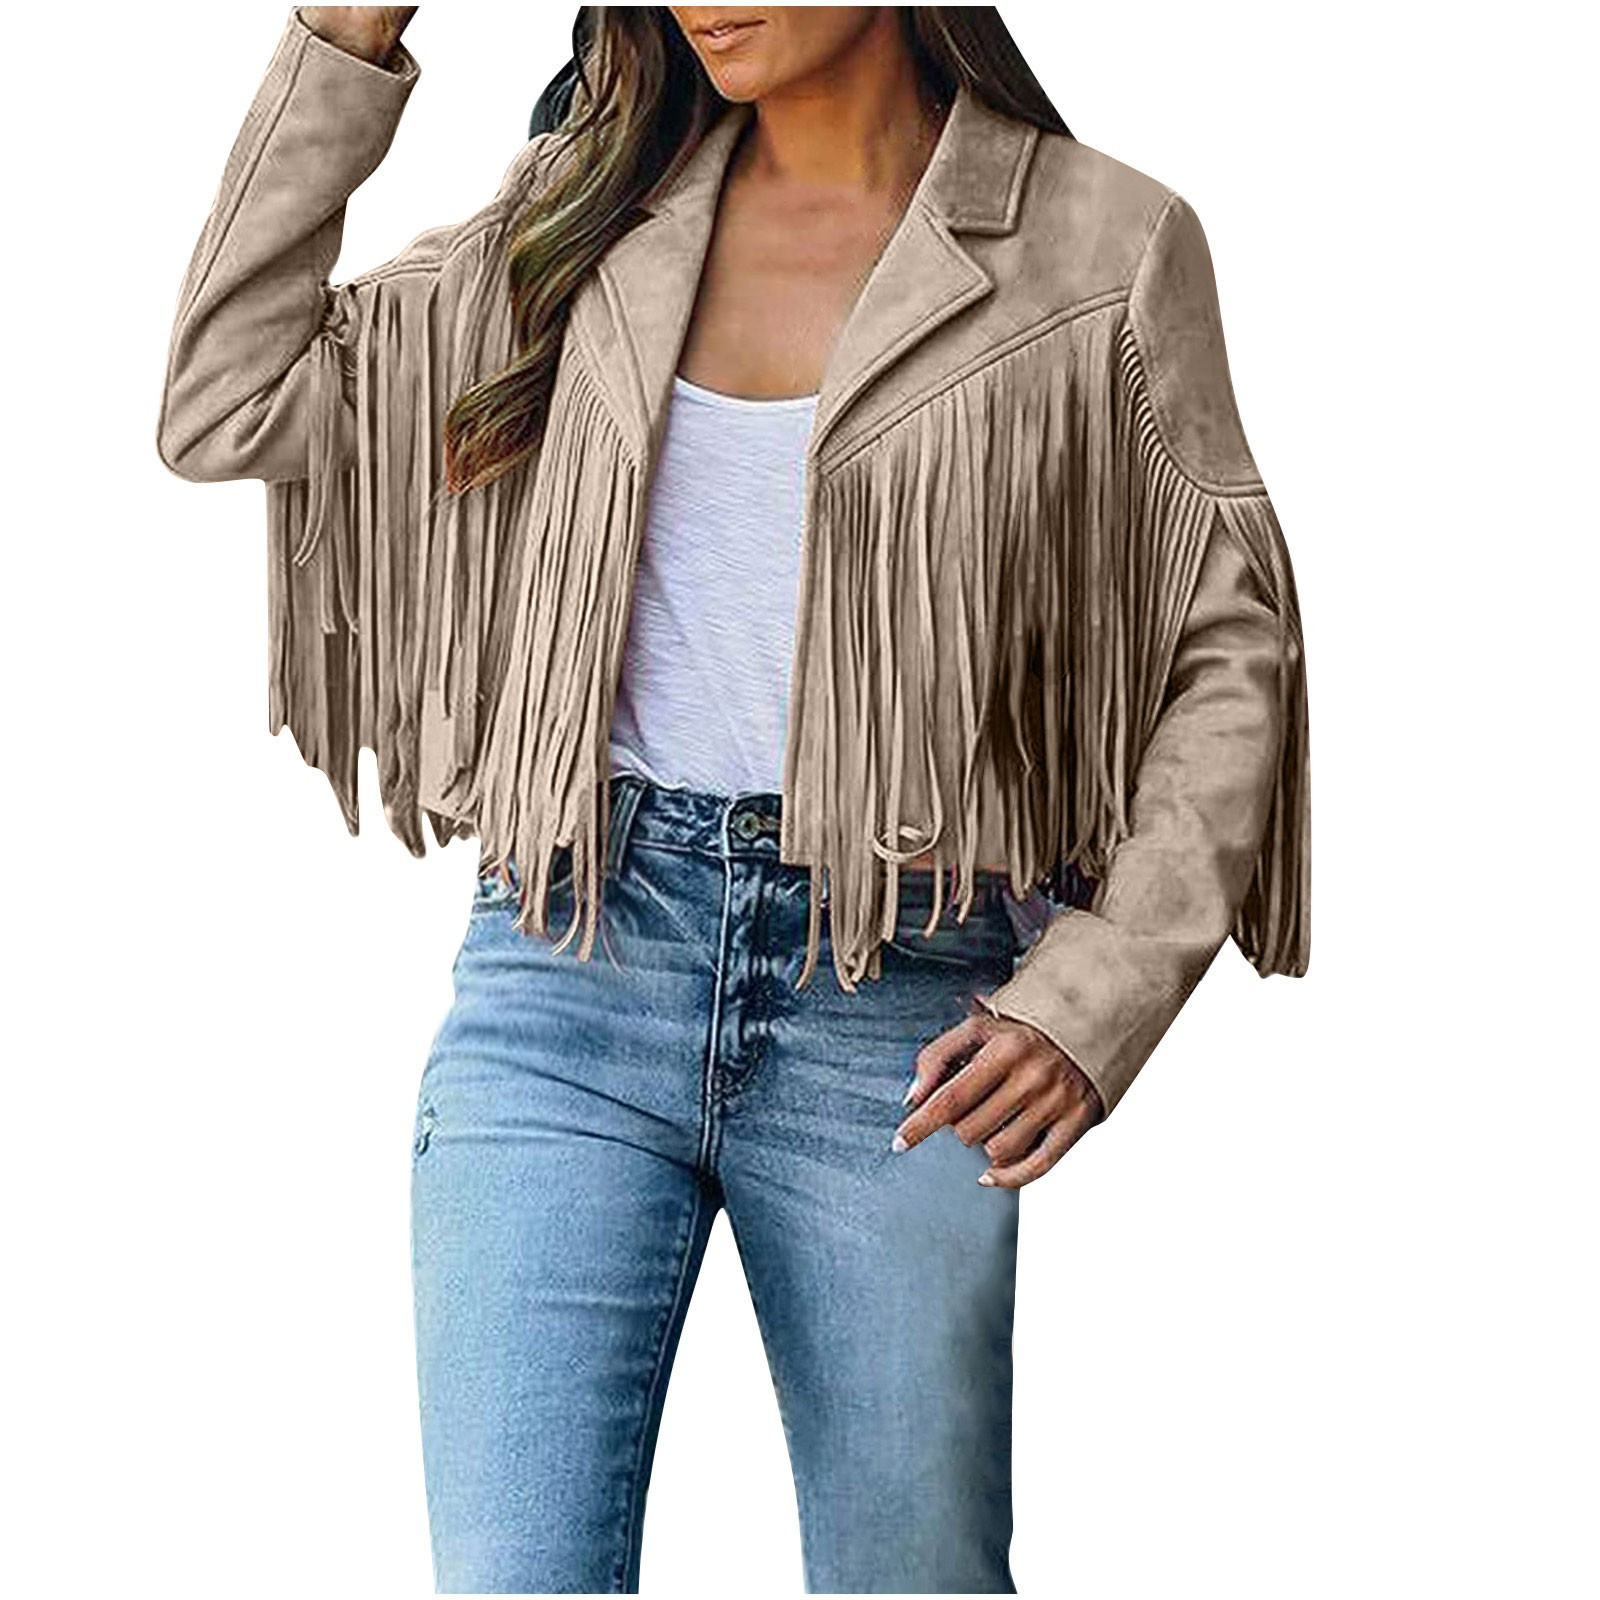 Womens 2023 Fashion Faux Suede Tassel Jackets,Lapel Cropped Motorcycle Jacket Outerwear - image 1 of 9